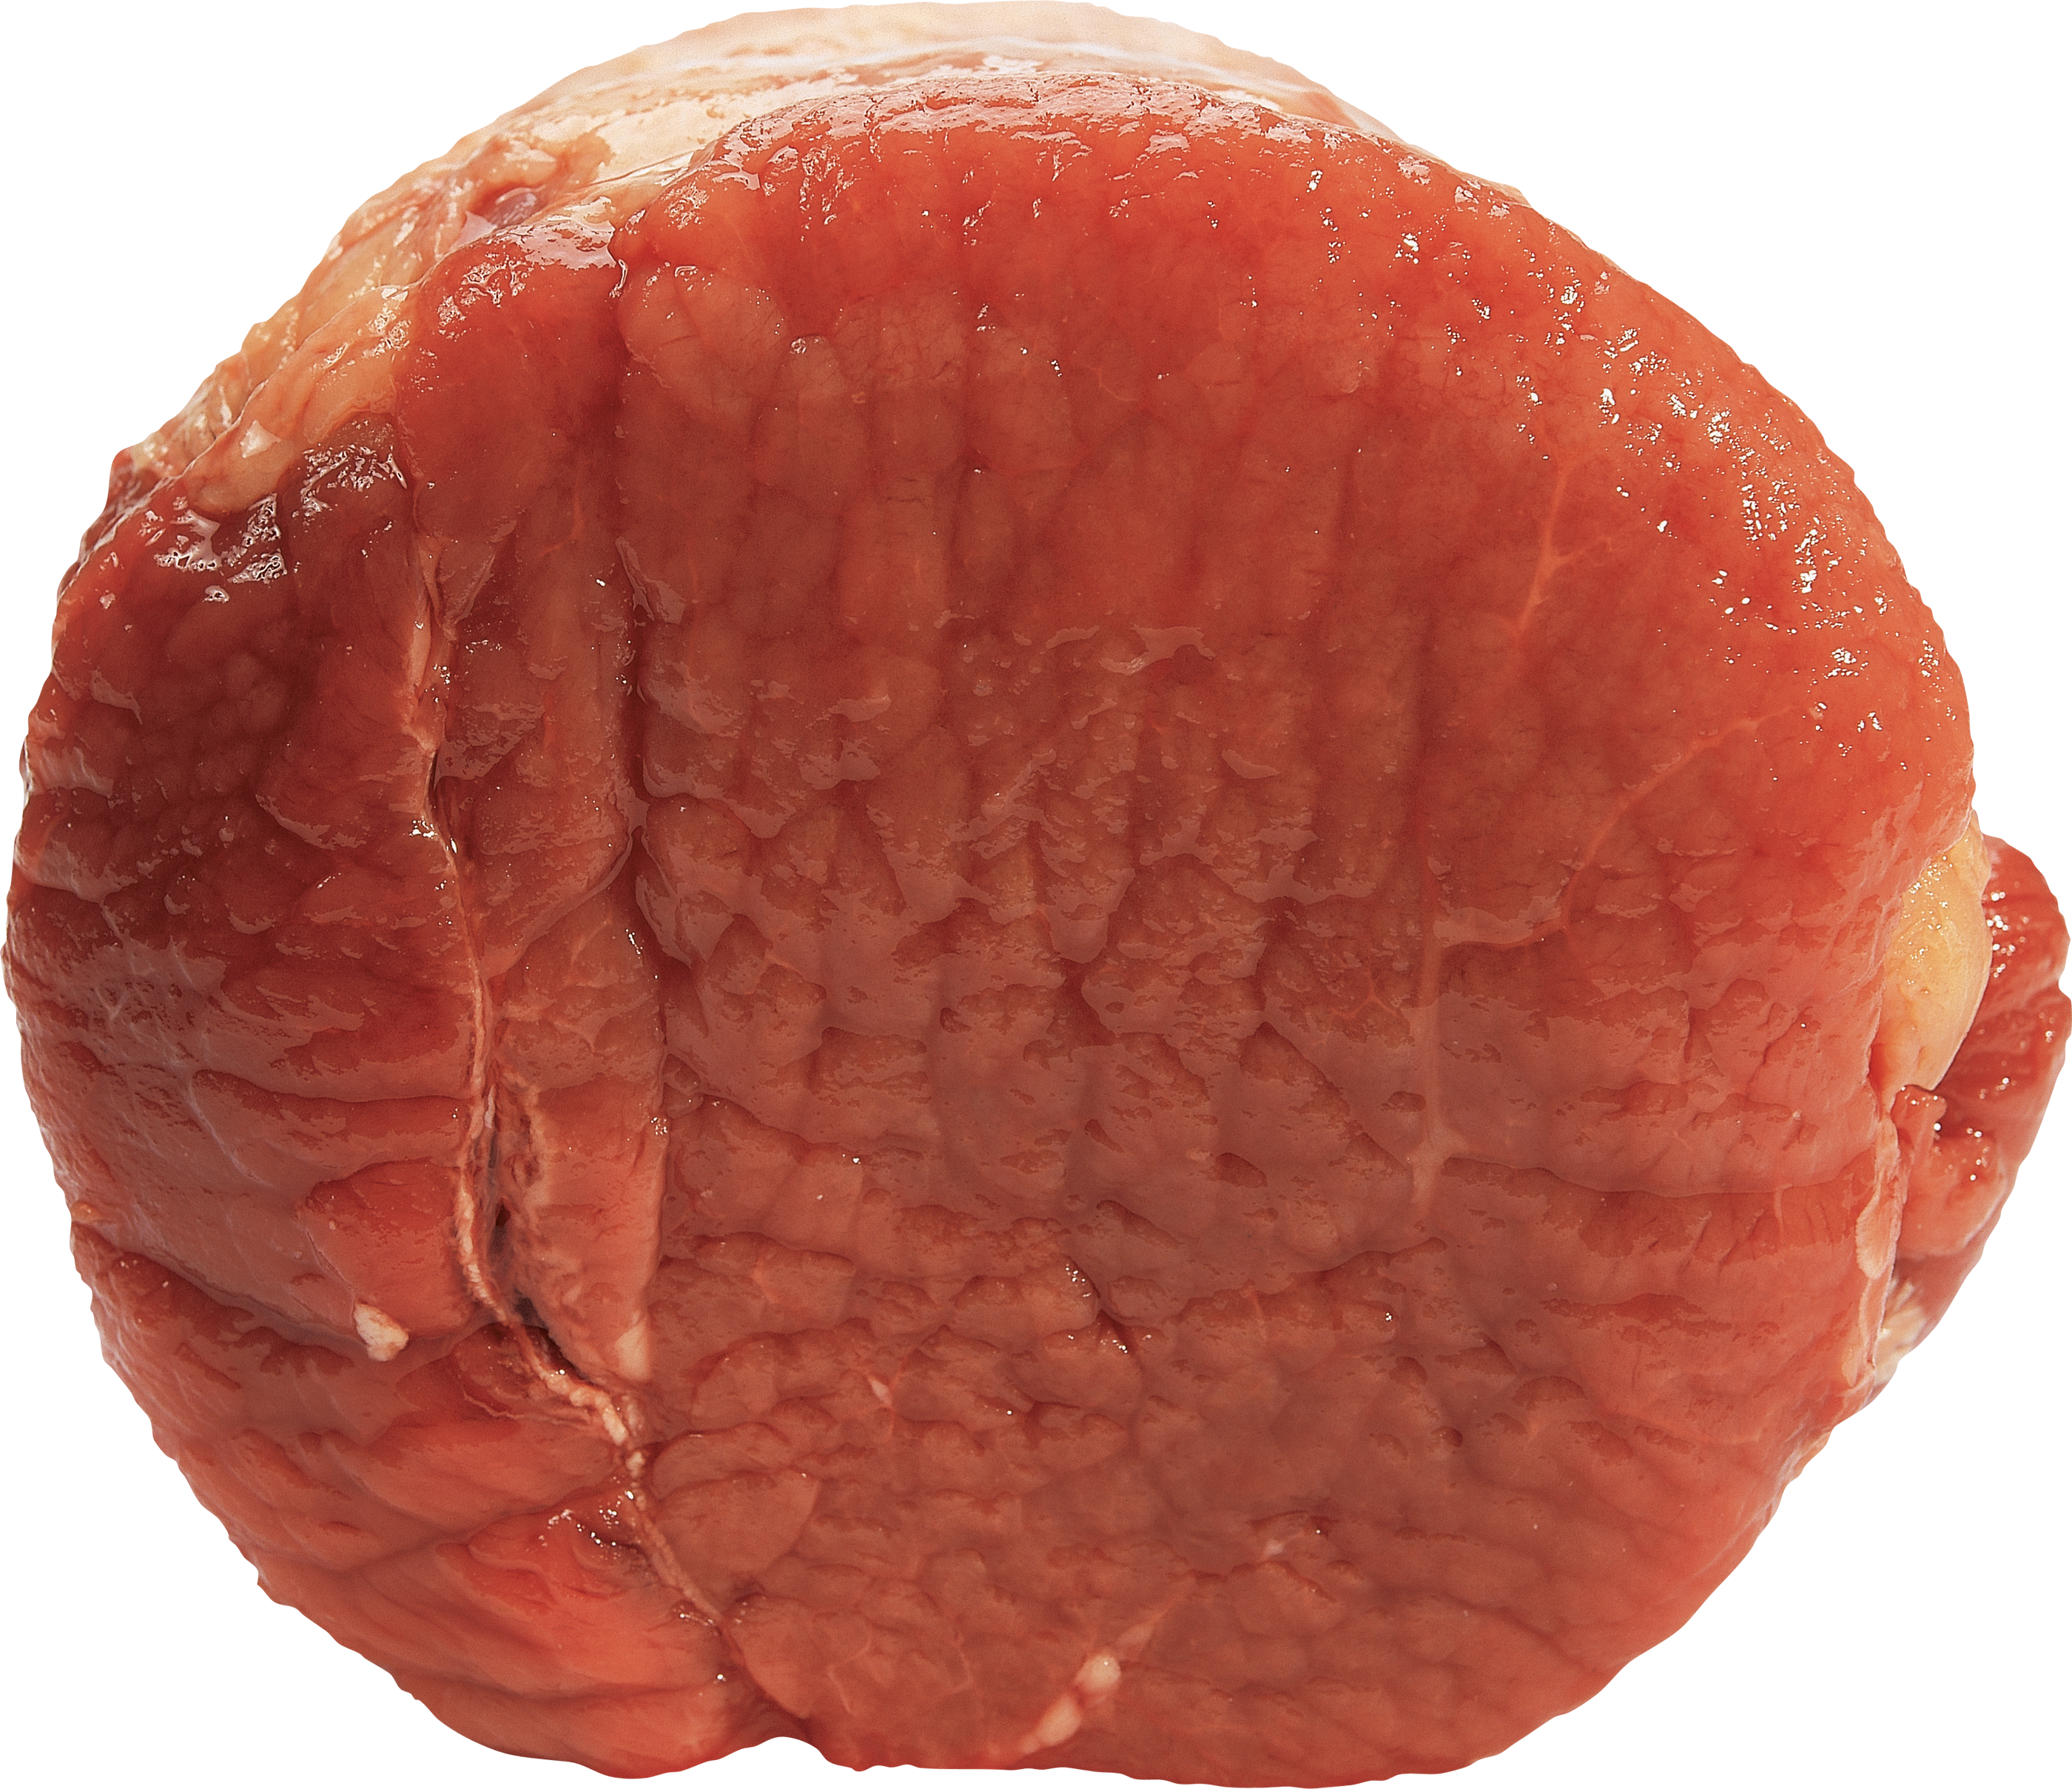 Meat PNG Image